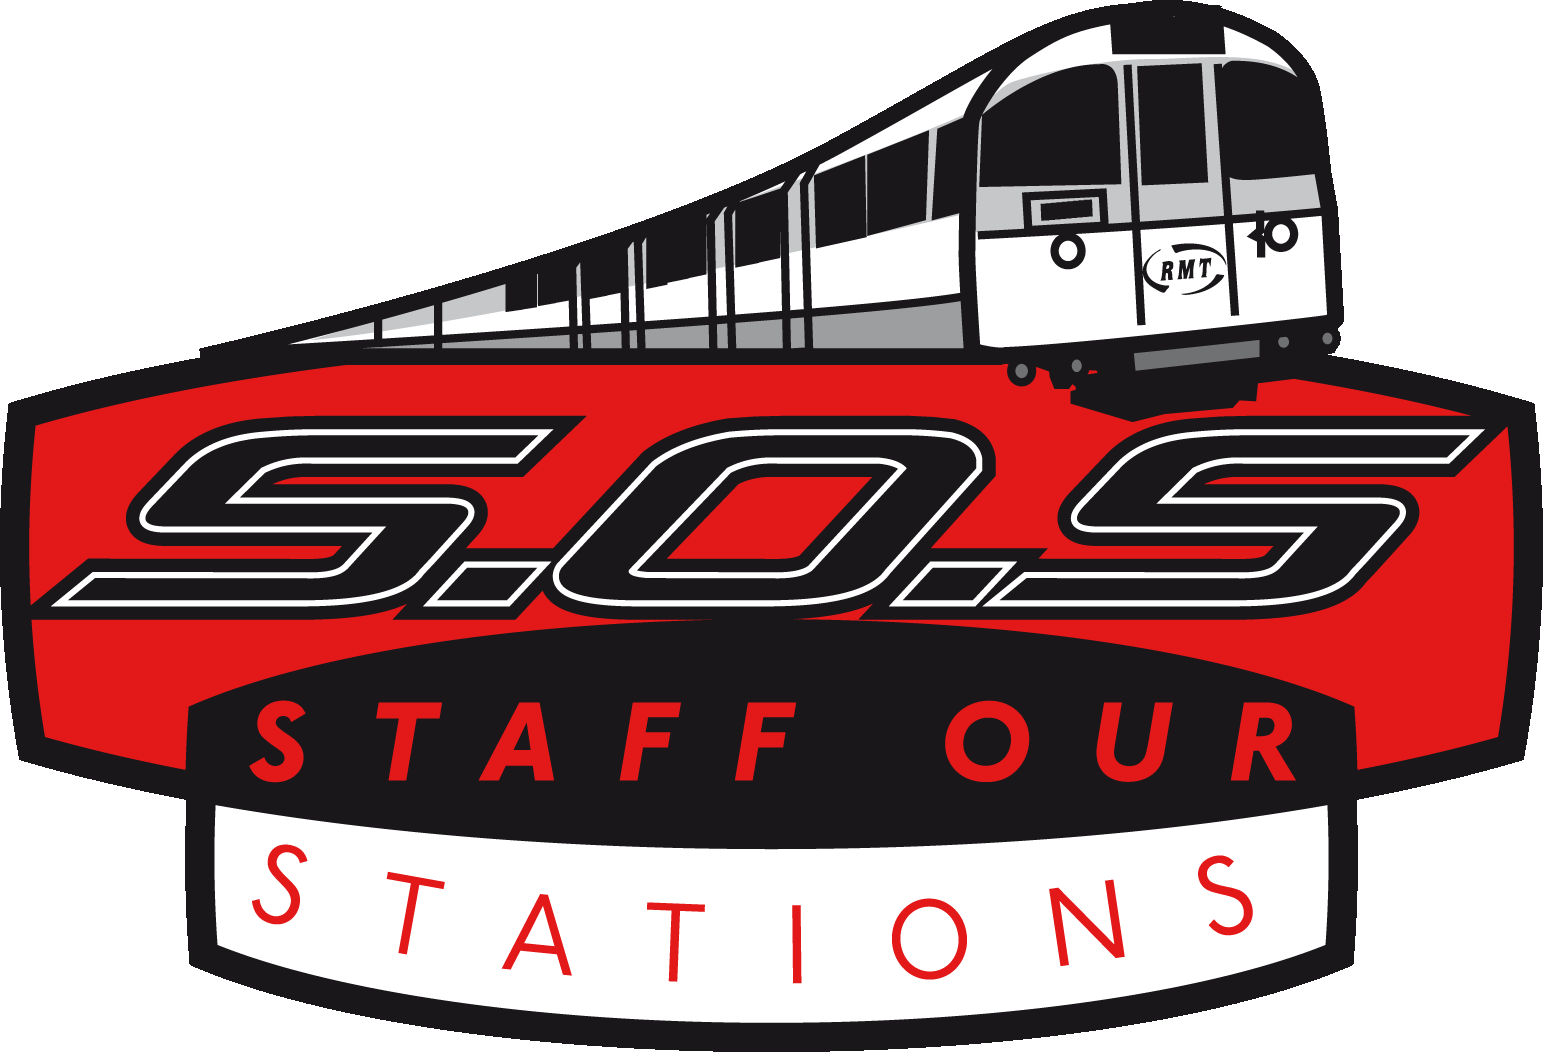 Save Our Stations